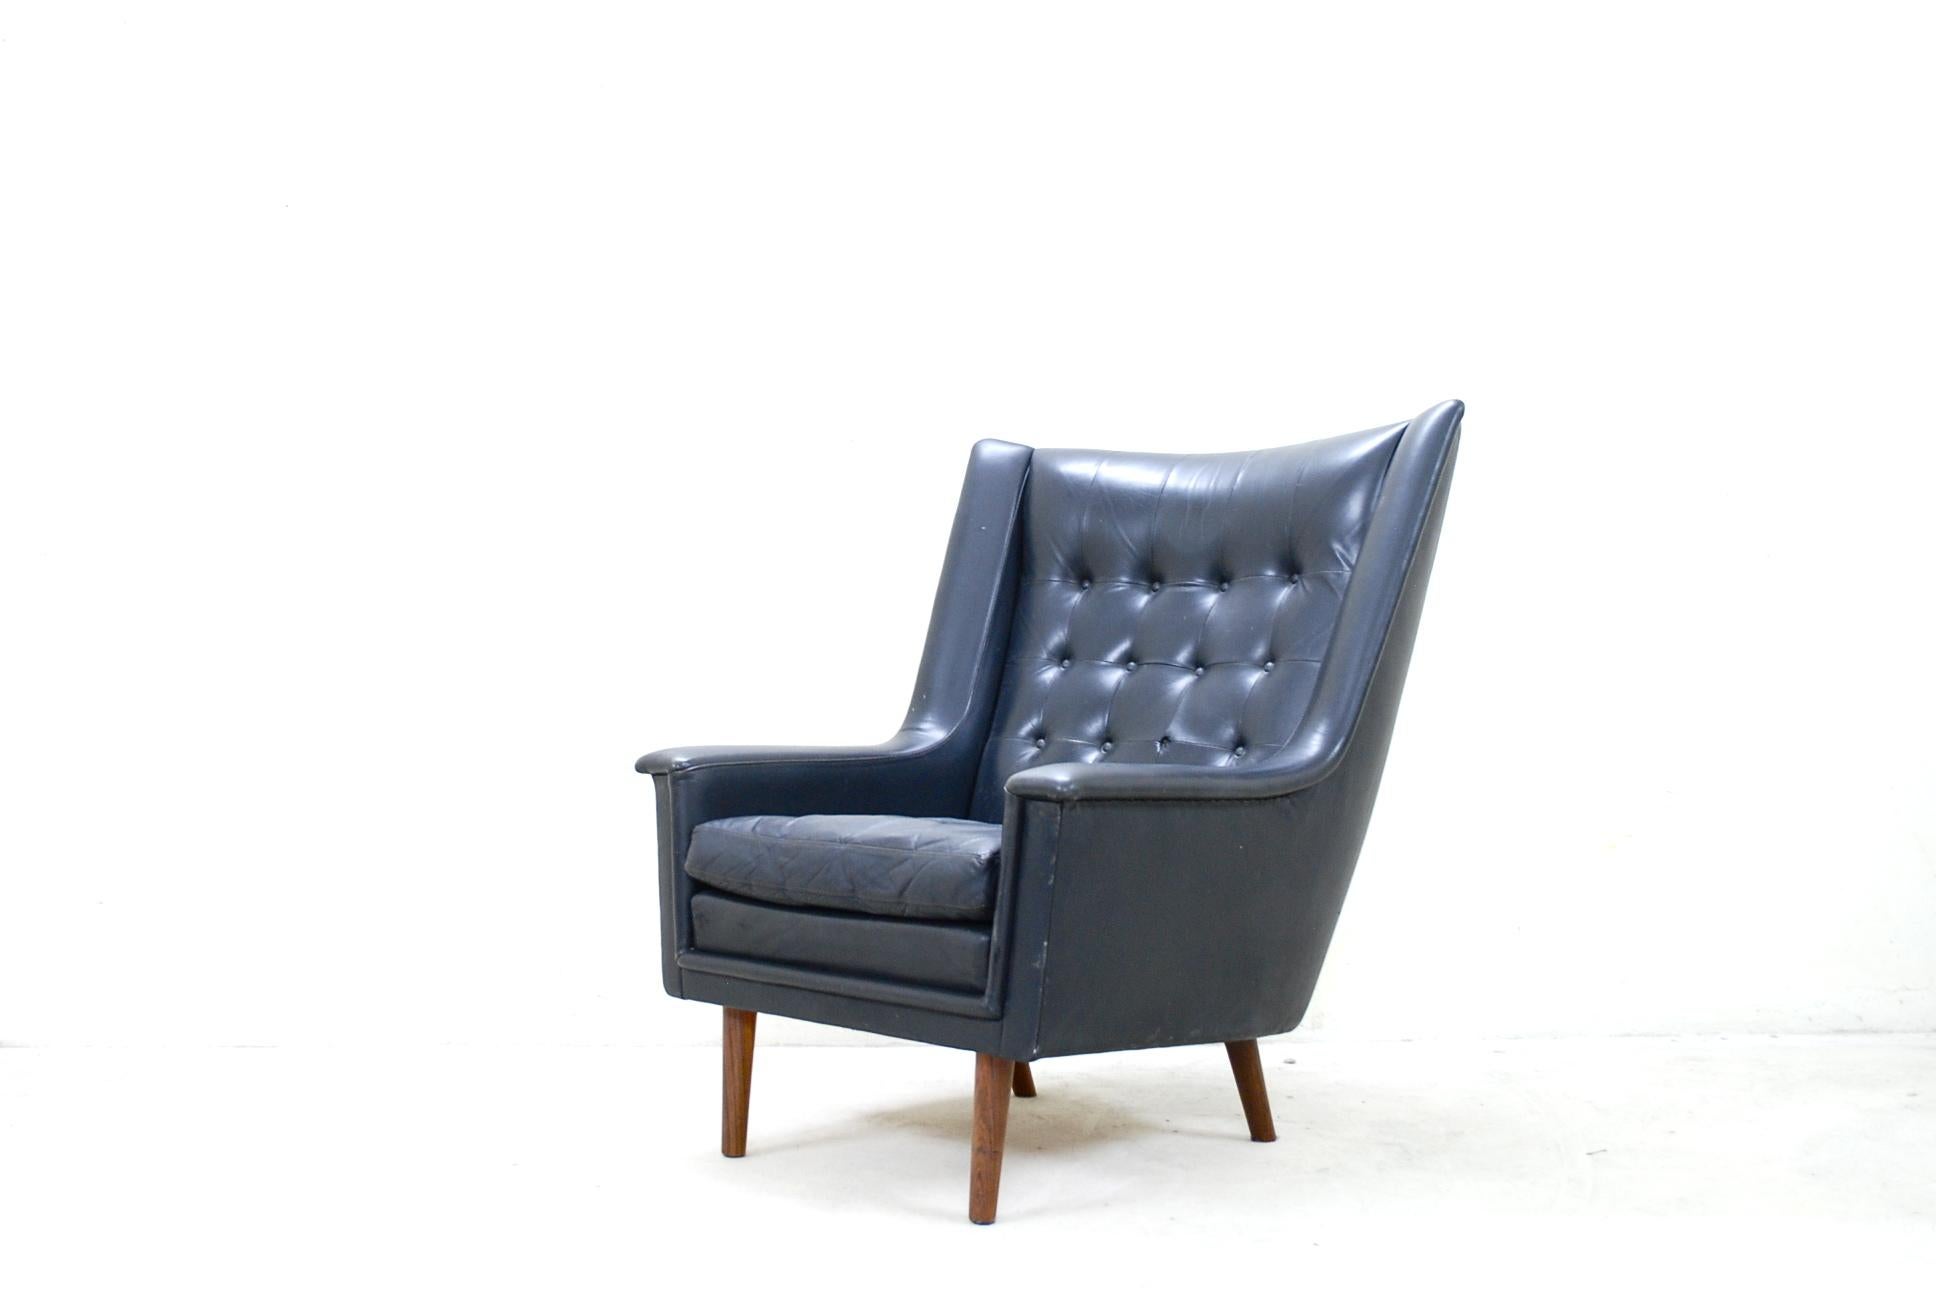 This wingback armchair is manufactured by Vejen Polster Mobelfabrik.
It comes from Denmark and has references to the Wegner Papa Bear chair.
Black leather and afromosia wood.